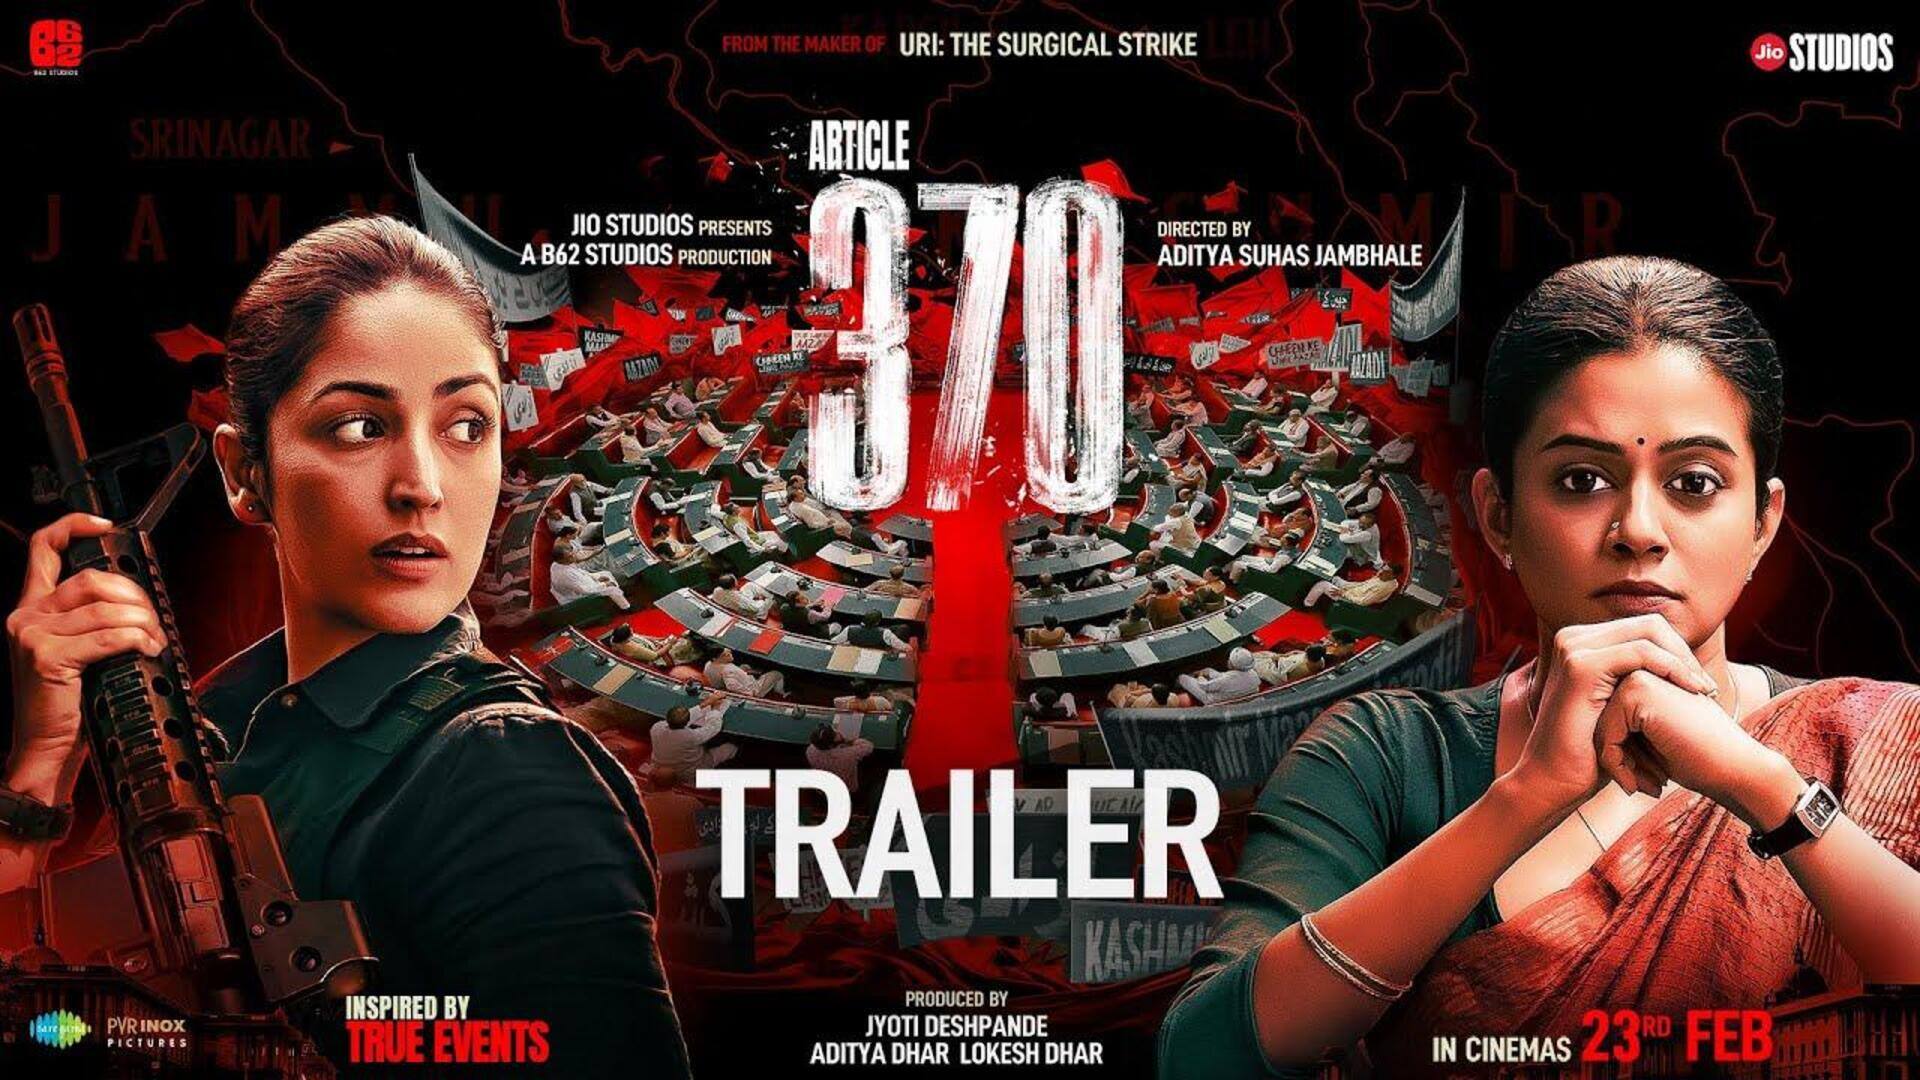 Box office collection: 'Article 370' showcases impressive hold